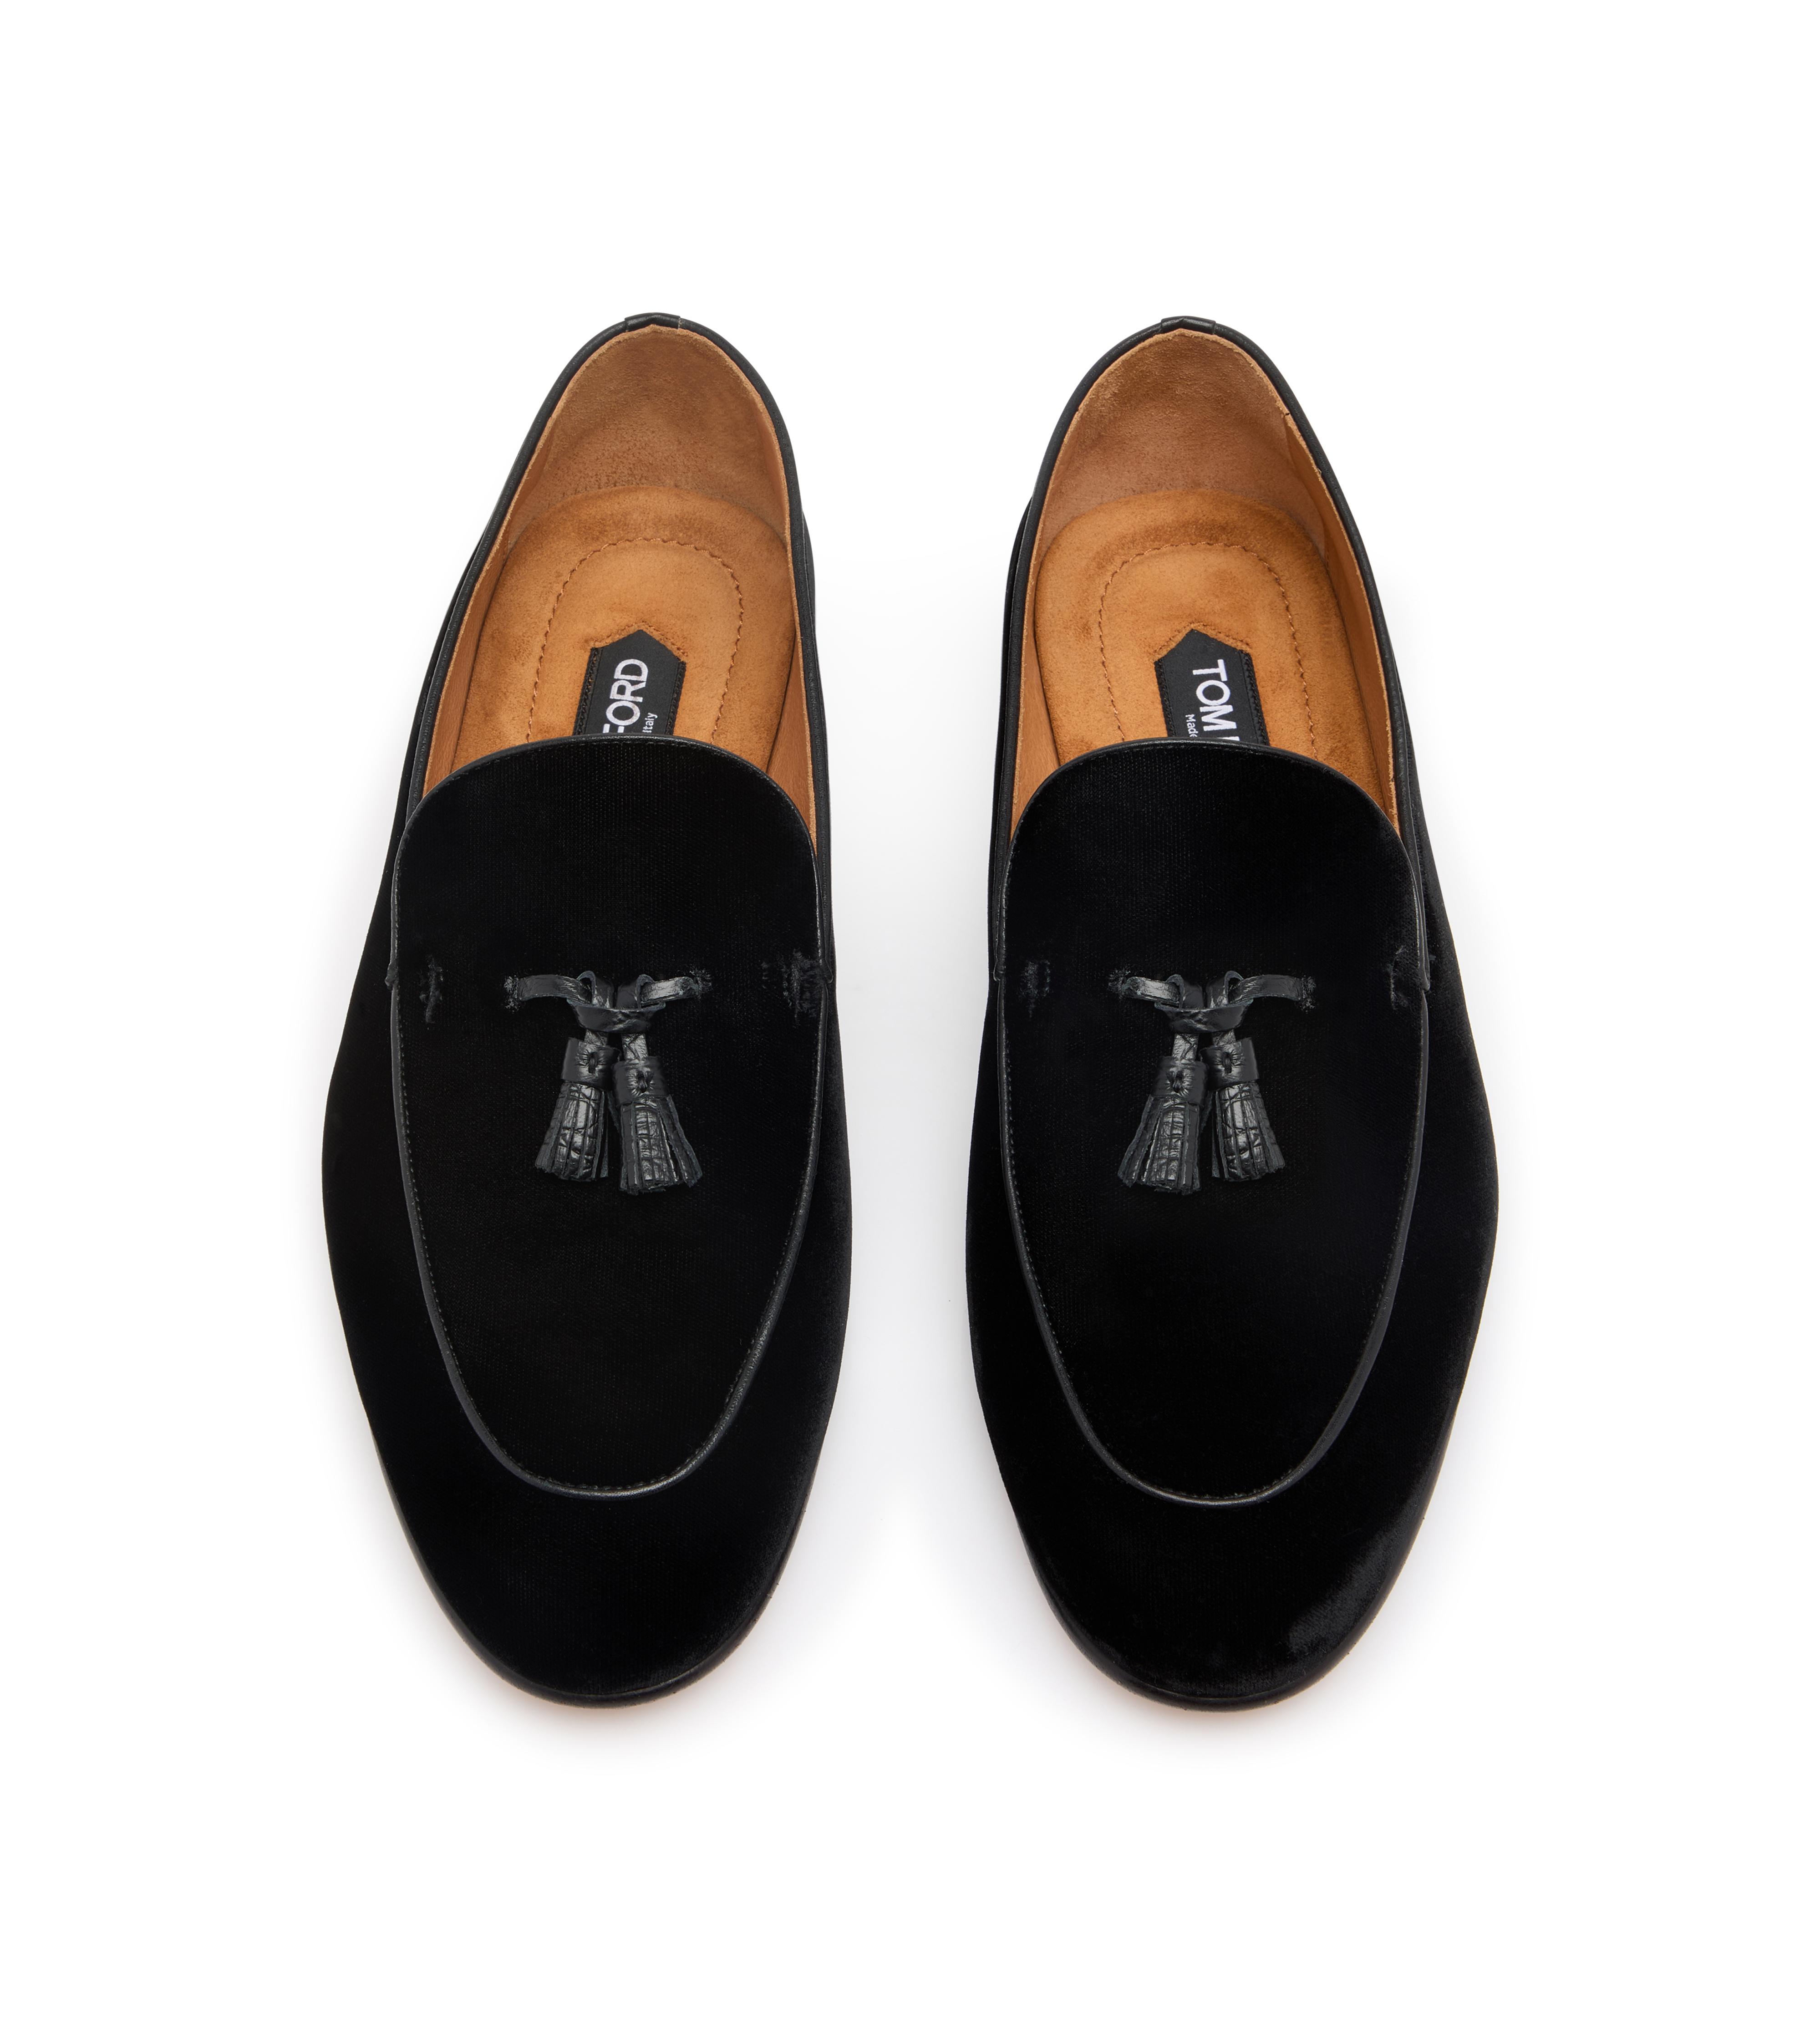 TOM FORD Nicolas Tasselled Patent-Leather Loafers for Men